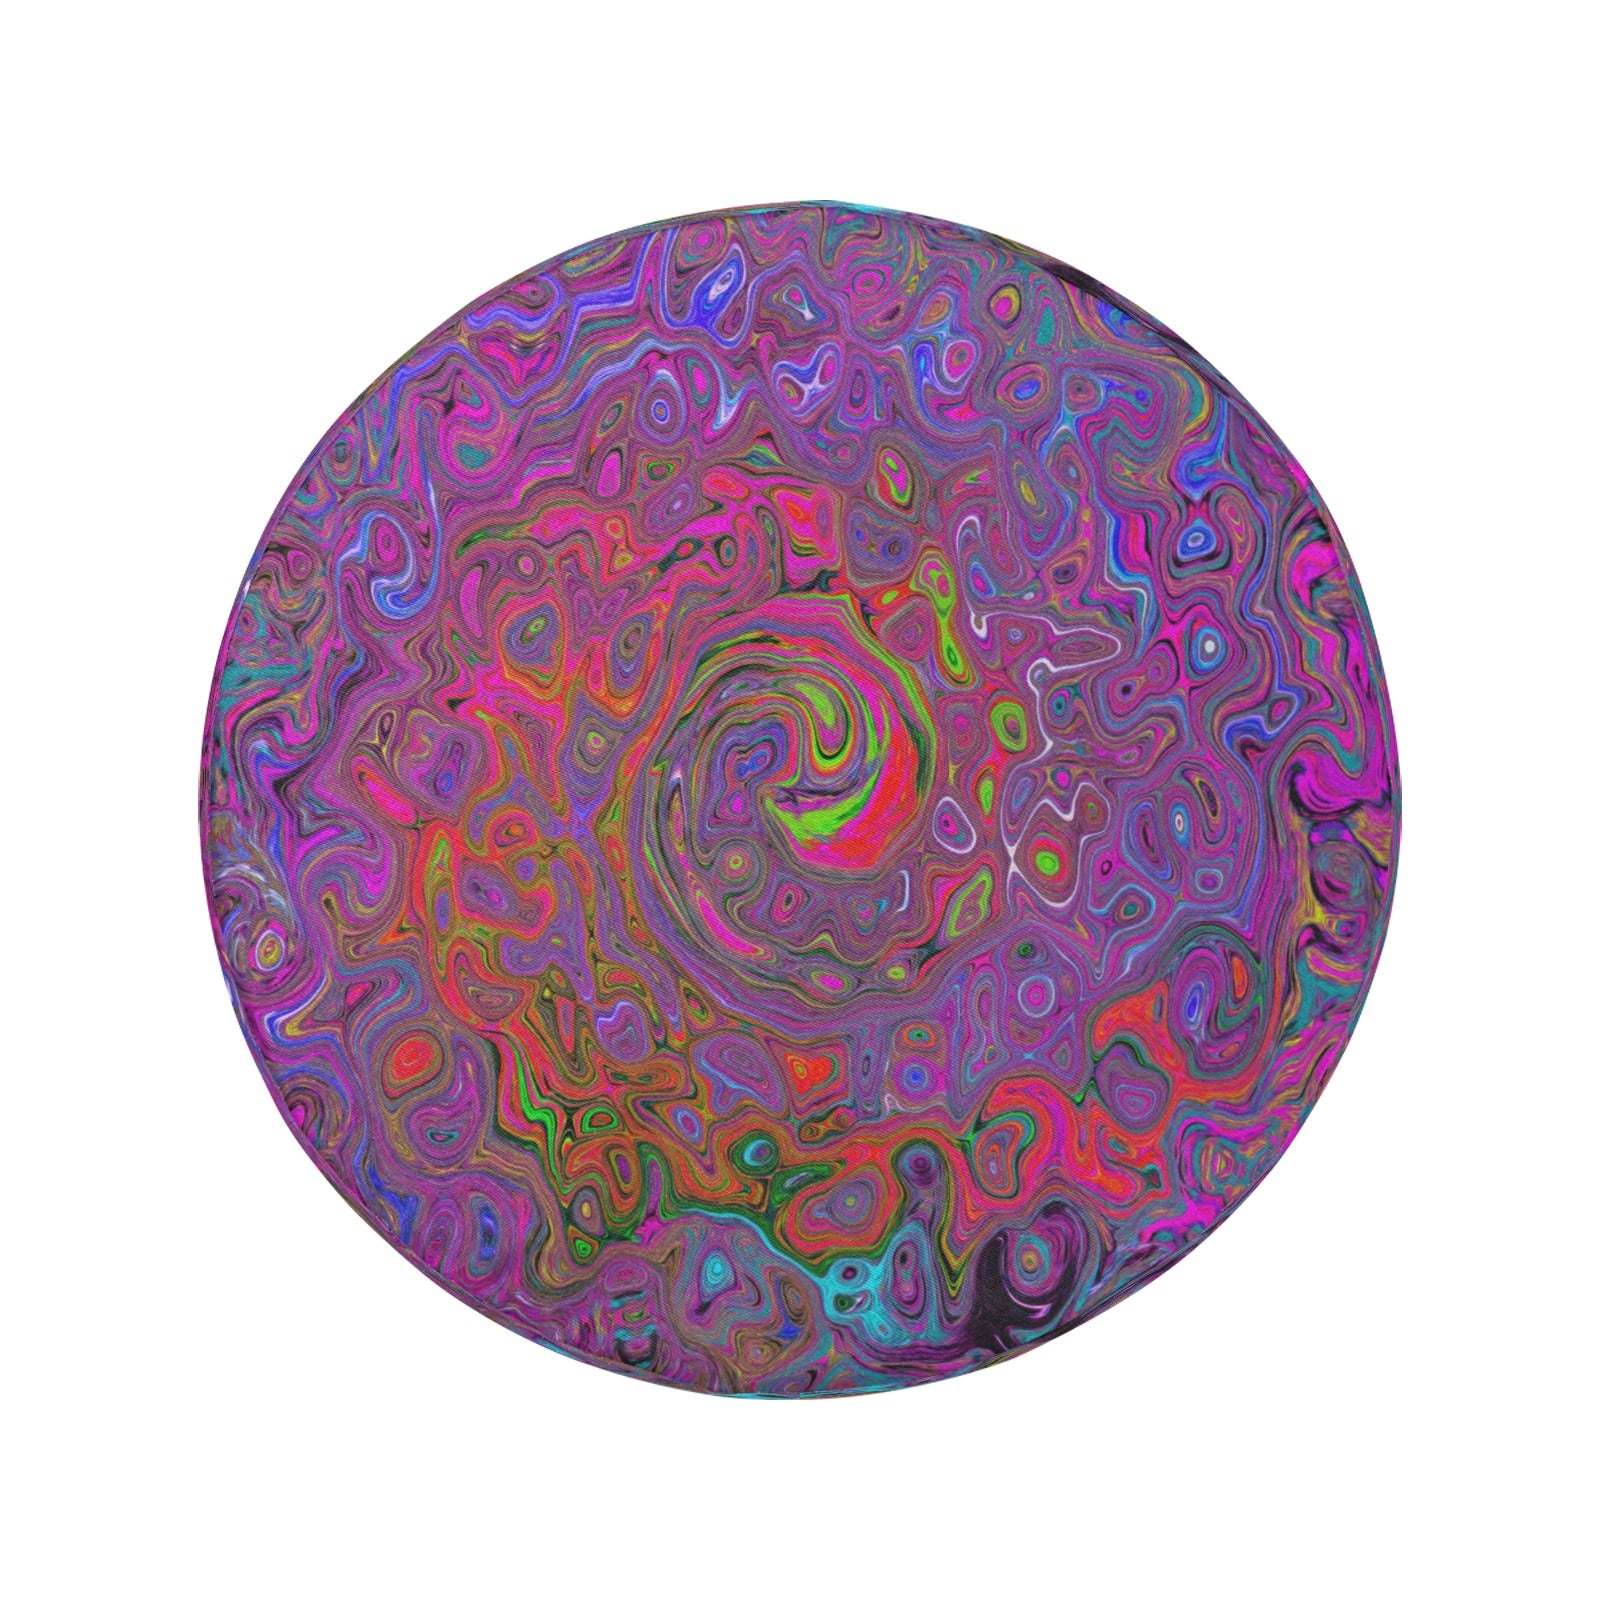 Spare Tire Covers, Psychedelic Groovy Magenta Retro Liquid Swirl - Large